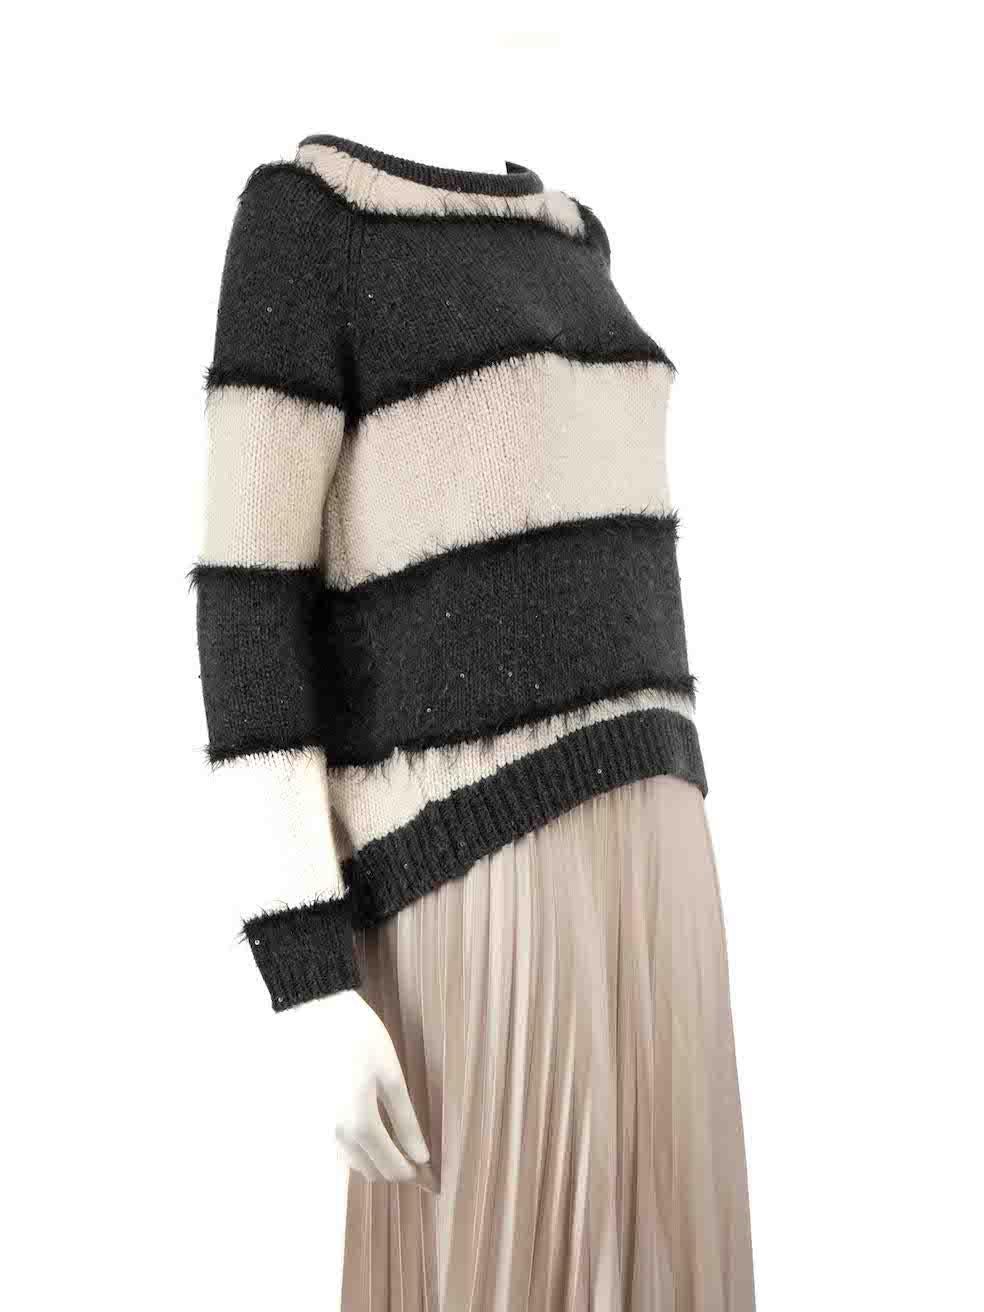 CONDITION is Very good. Hardly any visible wear to jumper is evident on this used Brunello Cucinelli designer resale item.
 
 
 
 Details
 
 
 Multicolour - Grey and cream
 
 Cashmere
 
 Long sleeves jumper
 
 Striped pattern
 
 Sequin accent
 
